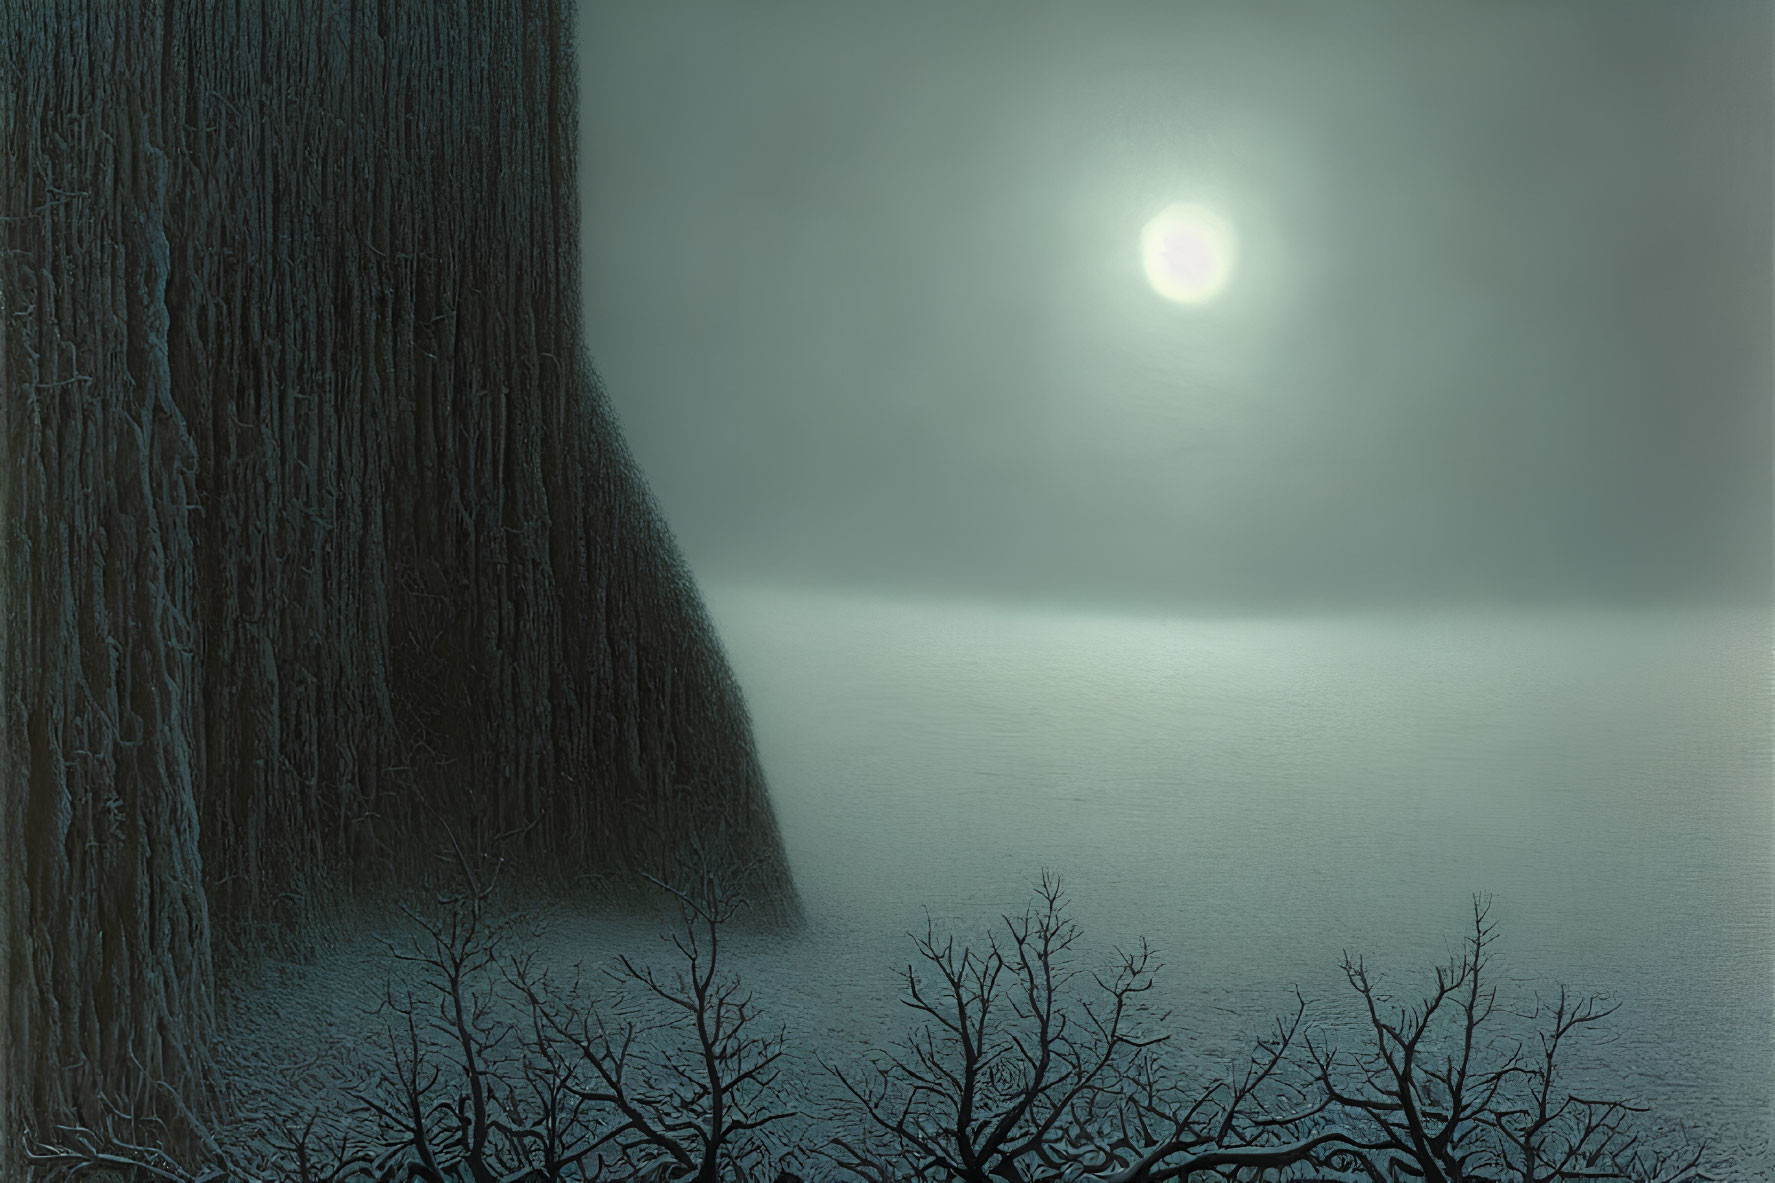 Misty winter night scene with full moon, fog, and bare trees